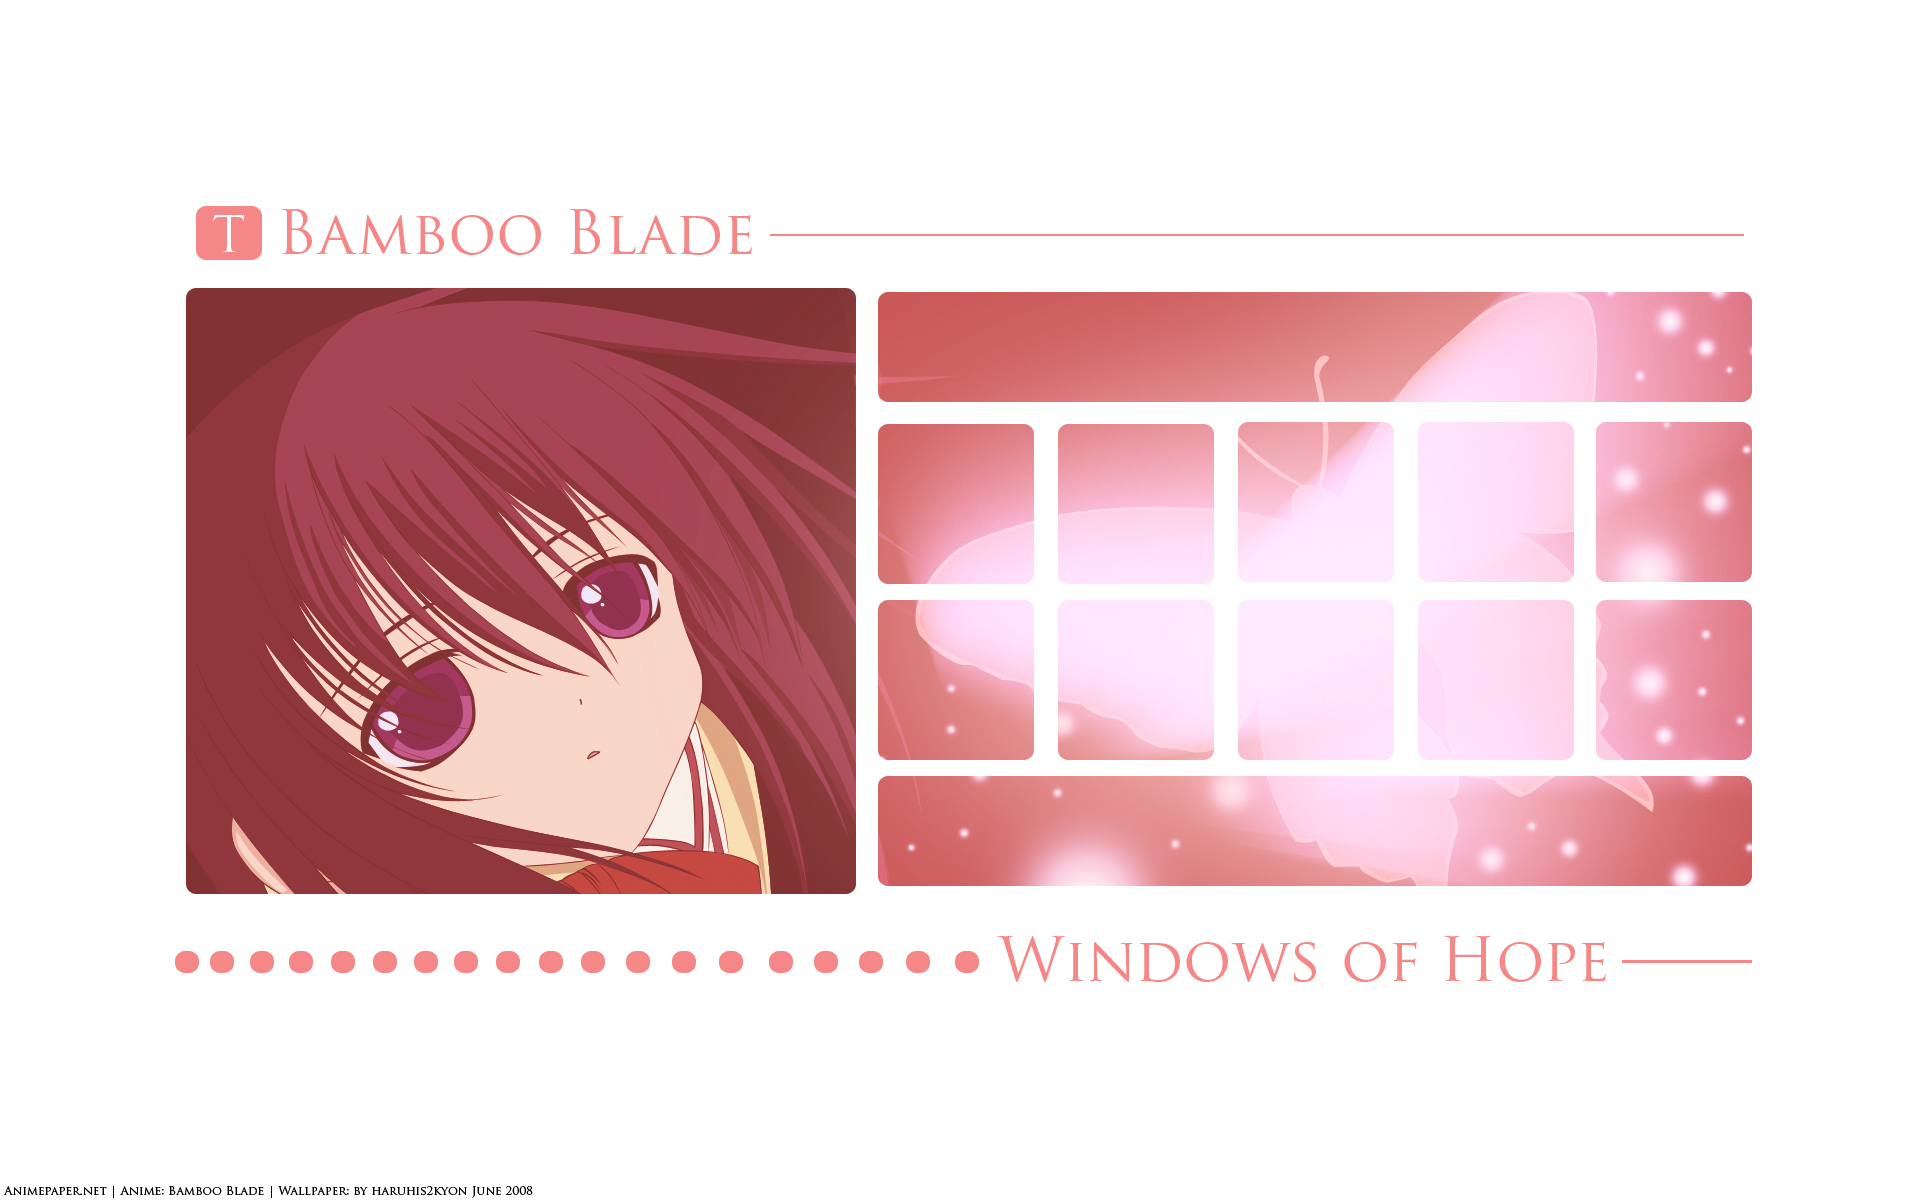 Bamboo Blade Anime: A captivating scene featuring characters wielding bamboo swords in a serene bamboo forest.